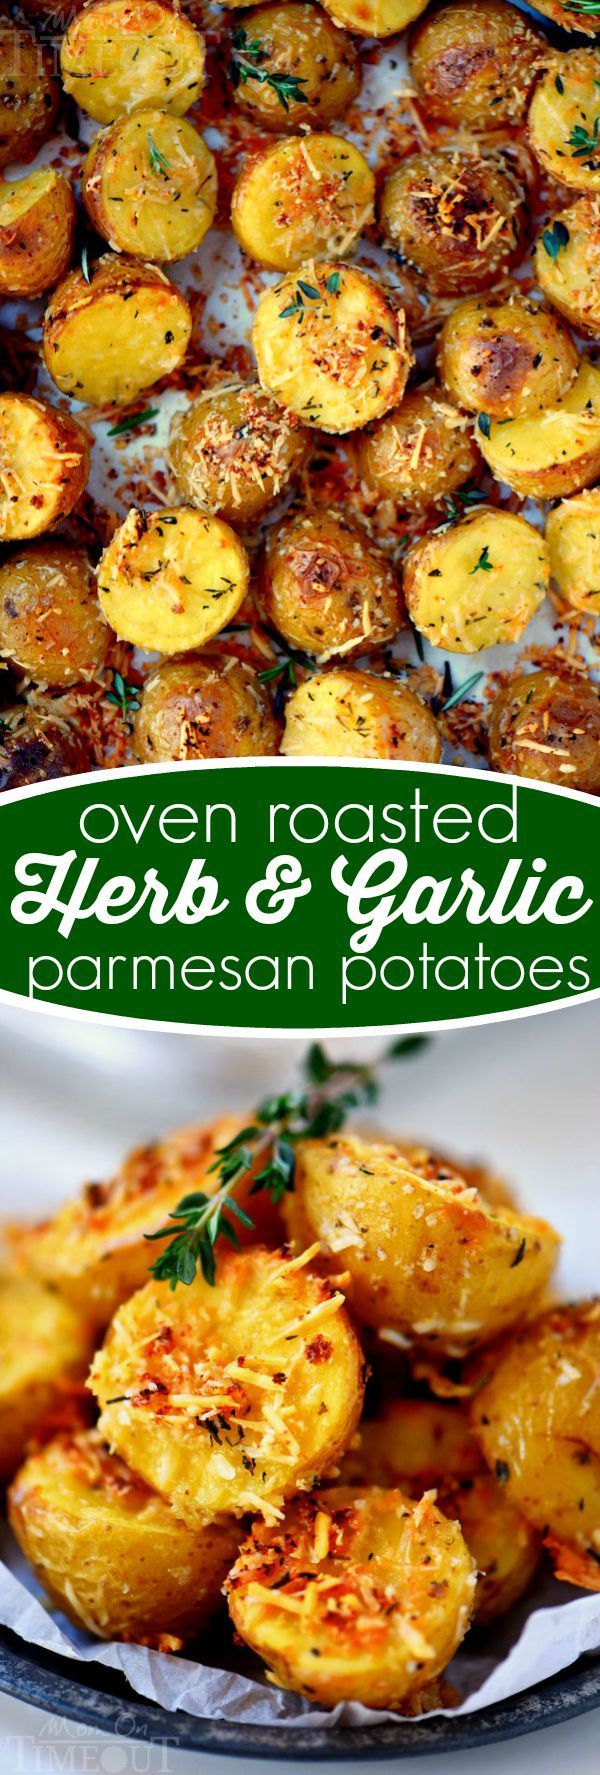 These Oven Roasted Herb and Garlic Parmesan Potatoes are the perfect side dish to whatever youre making for dinner tonight!